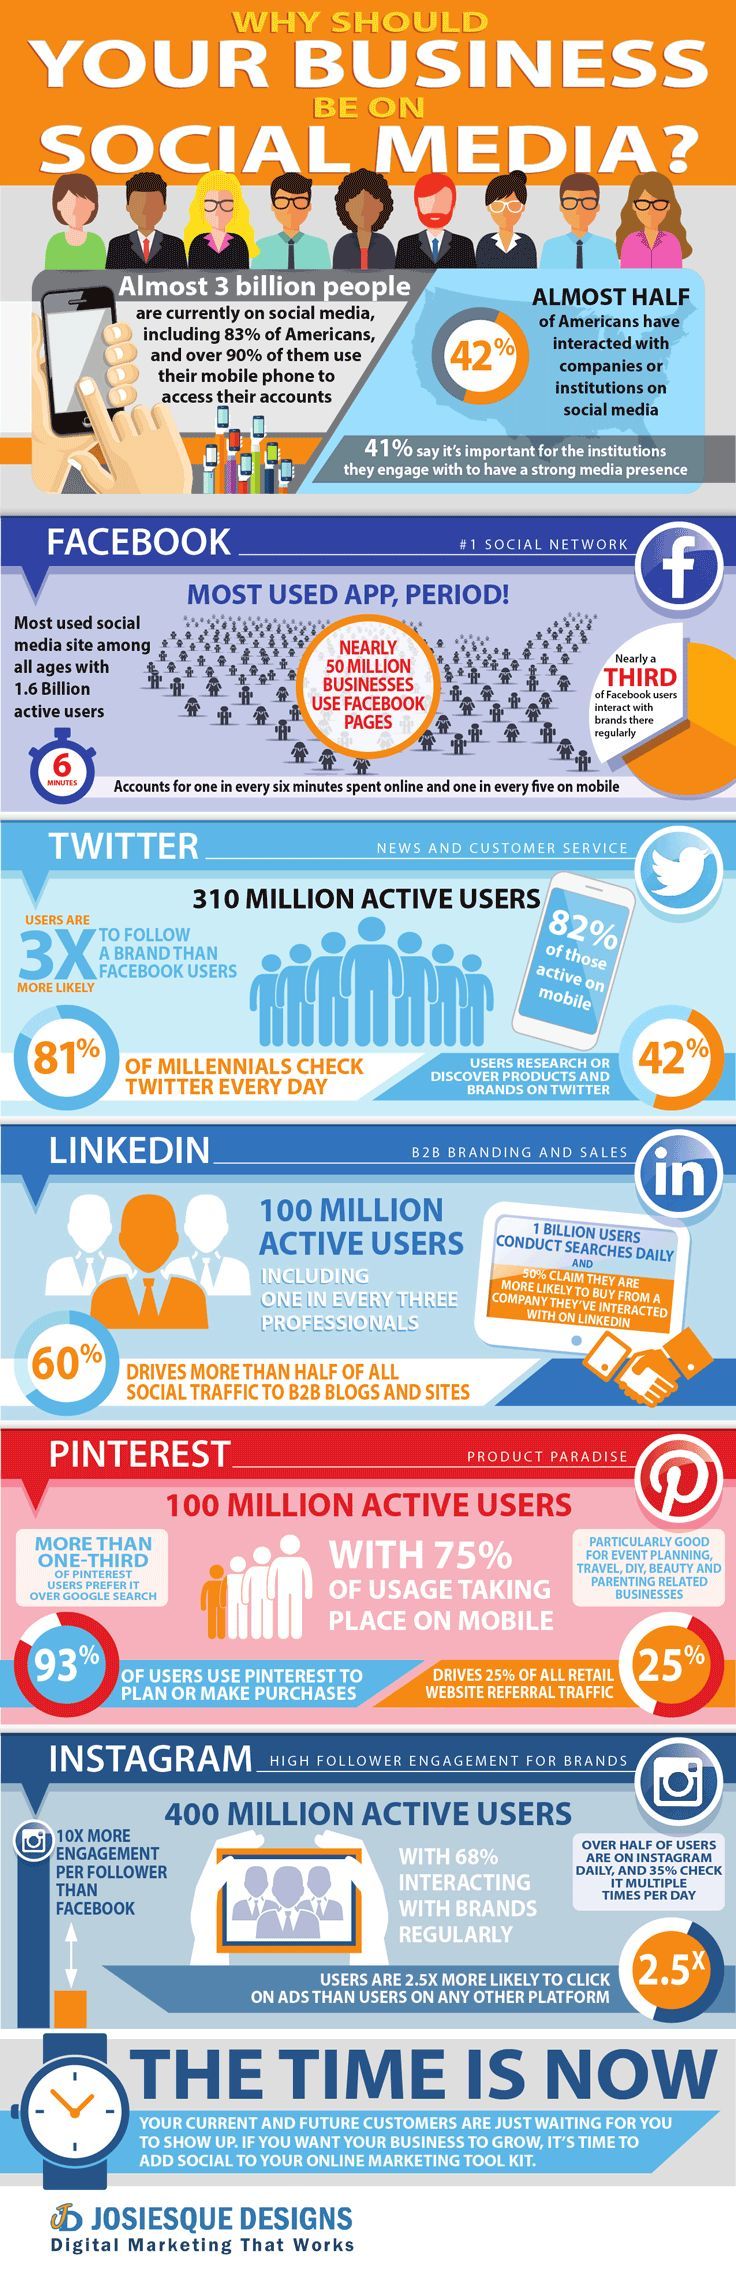 Marketing-Infographic-Social-media-marketing-tips-Looking-for-your-target-audience-on-social-media-C Marketing Infographic : Social media marketing tips: Looking for your target audience on social media? C...